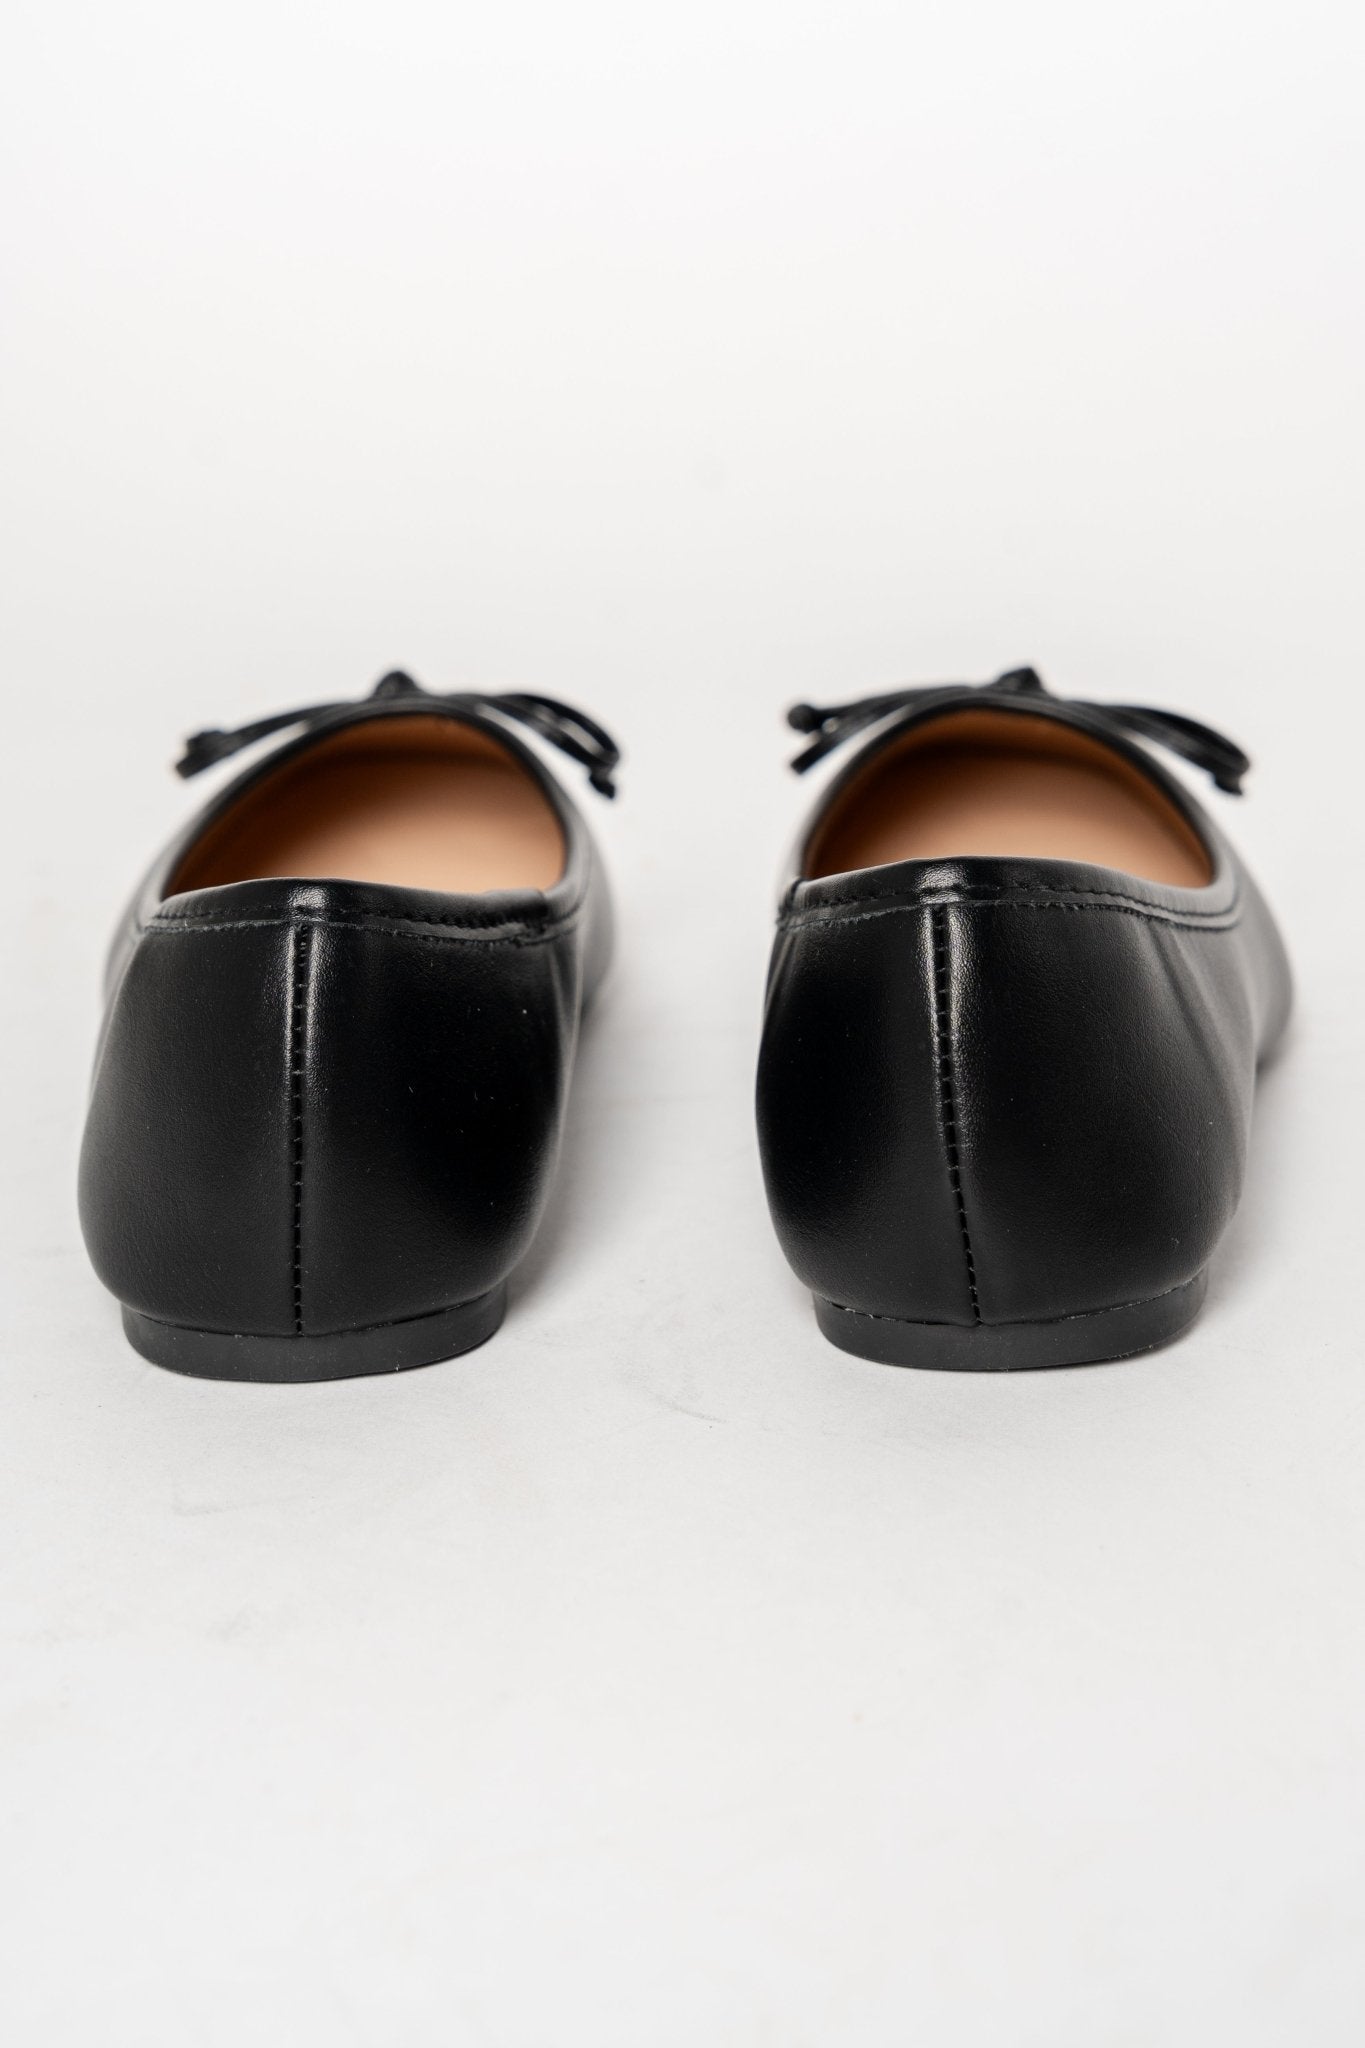 Tulin bow ballerina flats black - Affordable shoes - Boutique Shoes at Lush Fashion Lounge Boutique in Oklahoma City